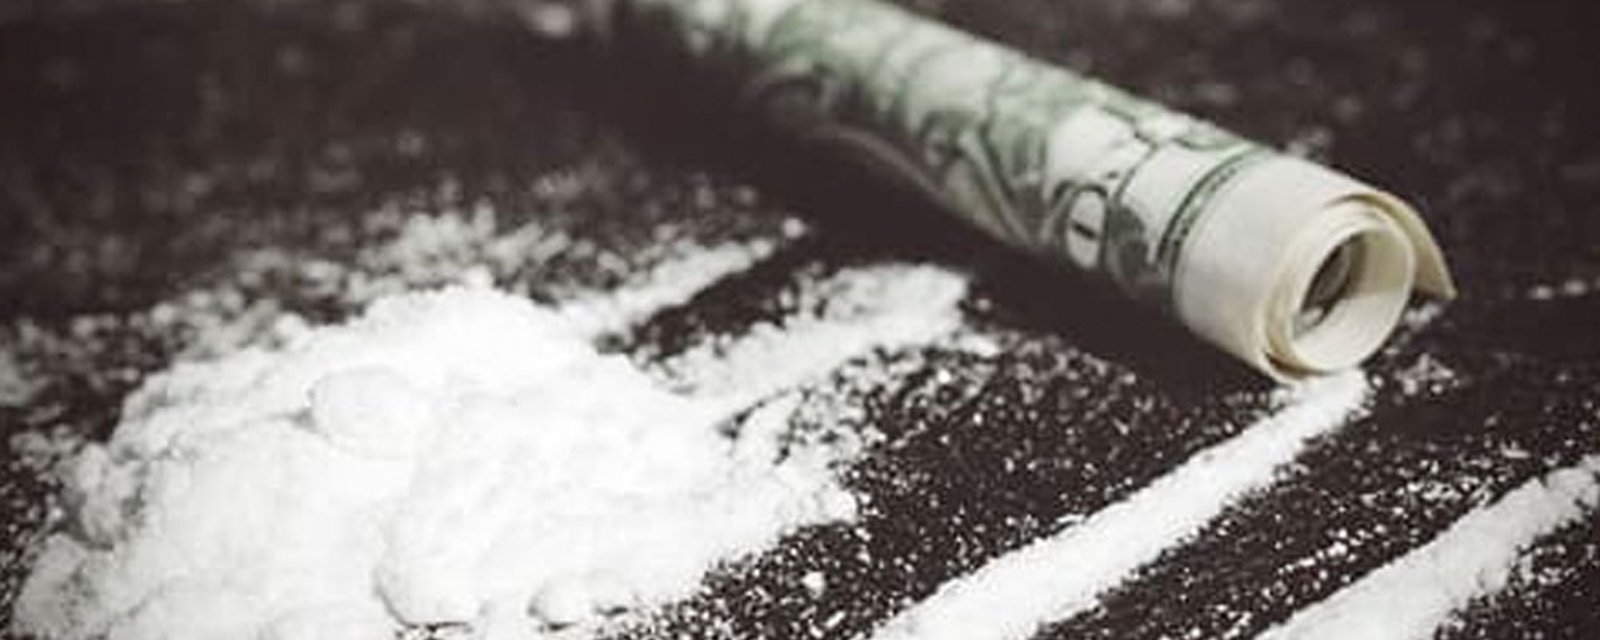 Breaking: NHL star busted for cocaine use